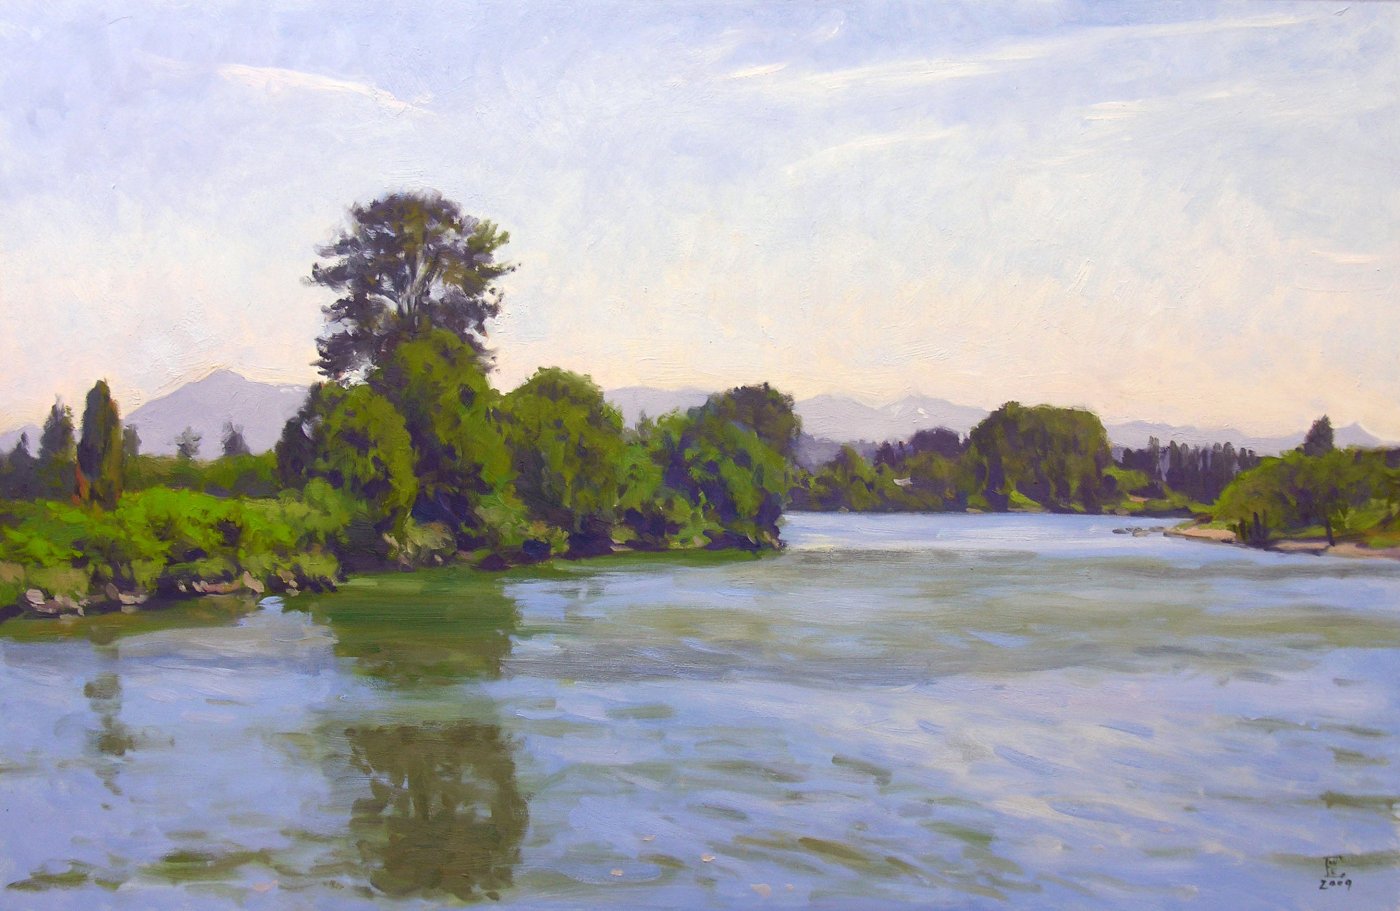 Snohomish River, oil on panel, 24 X 36 inches, copyright ©2009